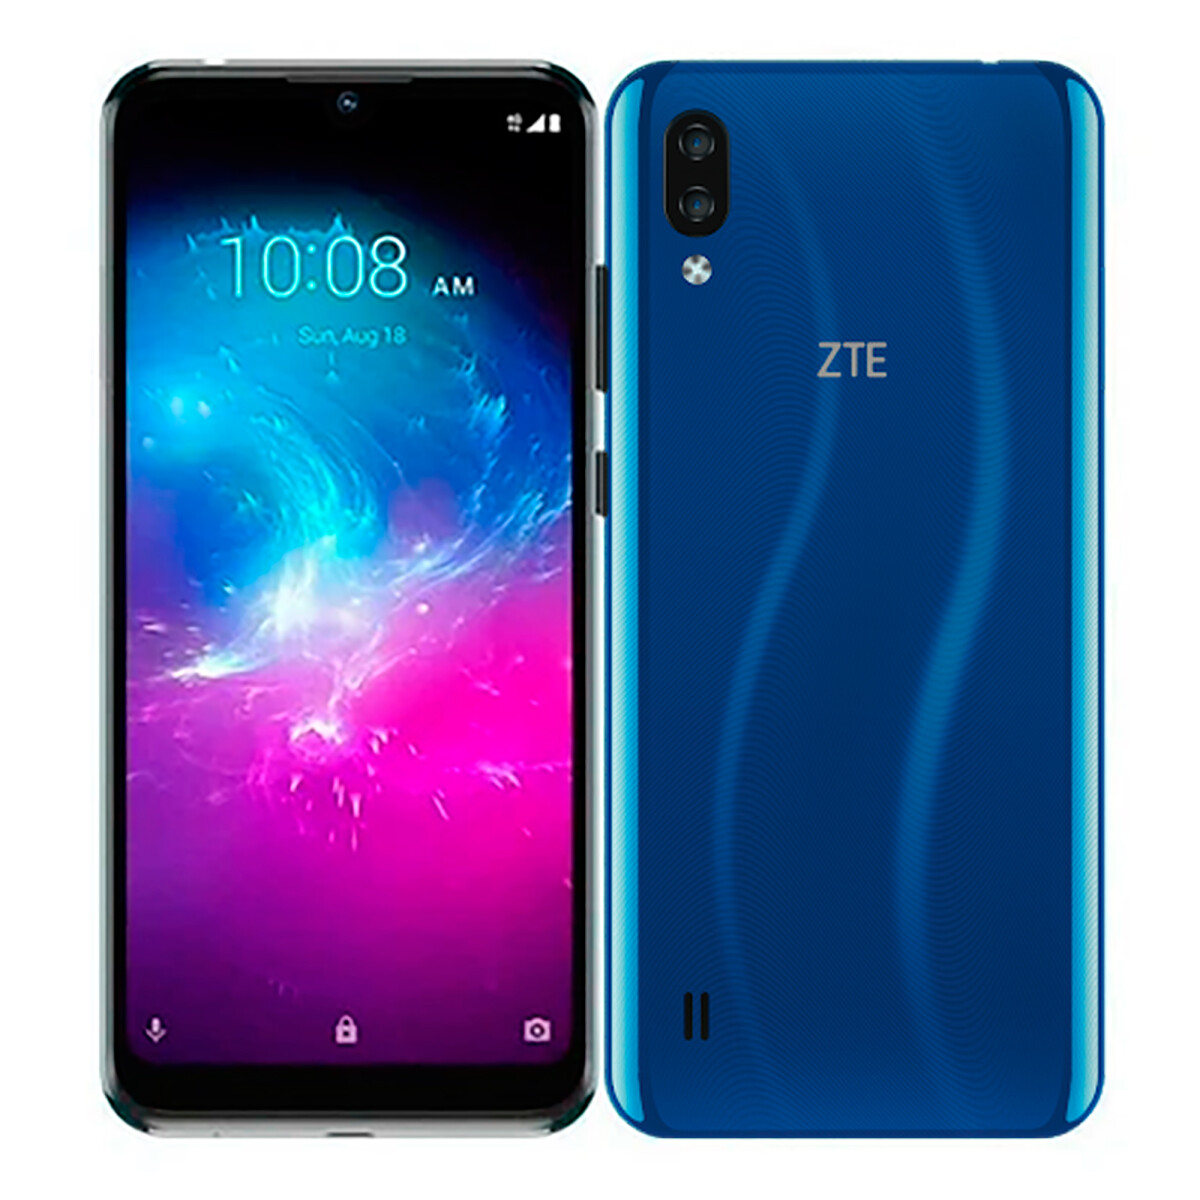 Zte - Smartphone Blade A5 (2020) - 6,08" Multitáctil ips Lcd. 2G. 3G. 4G. Octa Core. Android. Ram 2G - AZUL 